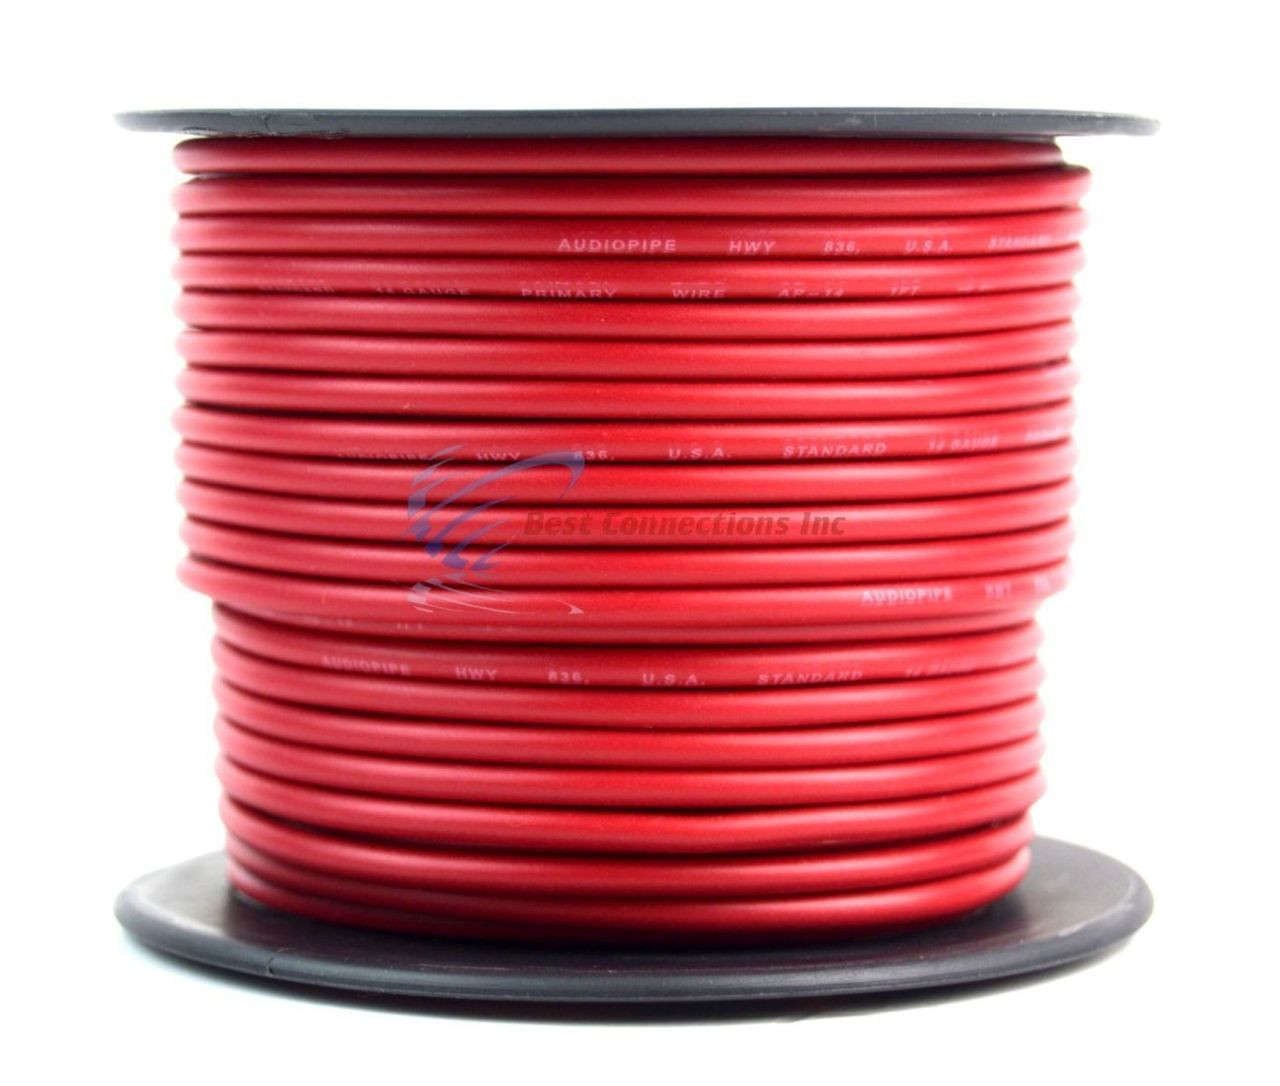 14 GAUGE WIRE RED & BLACK POWER GROUND 50 FT EACH PRIMARY STRANDED COPPER  CLAD